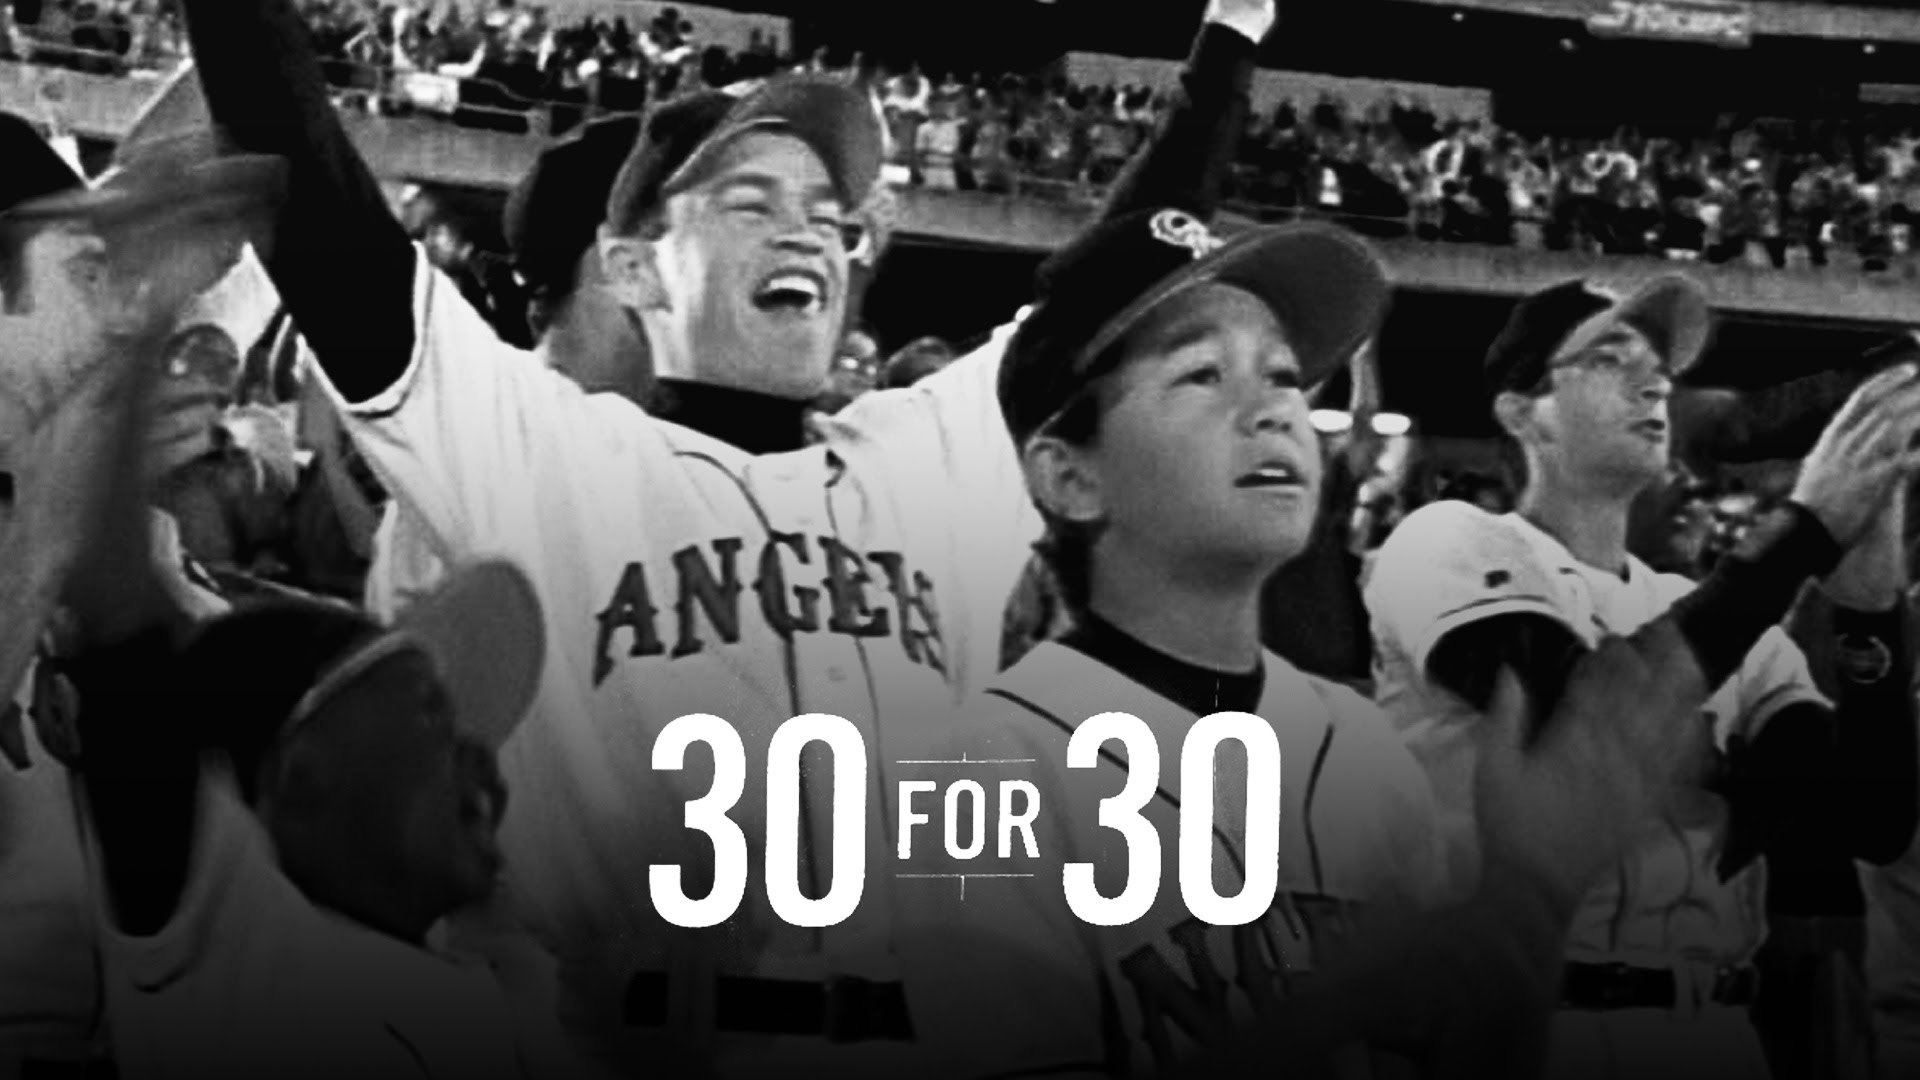 Hilarious: 30 For 30 on Angels In The Outfield